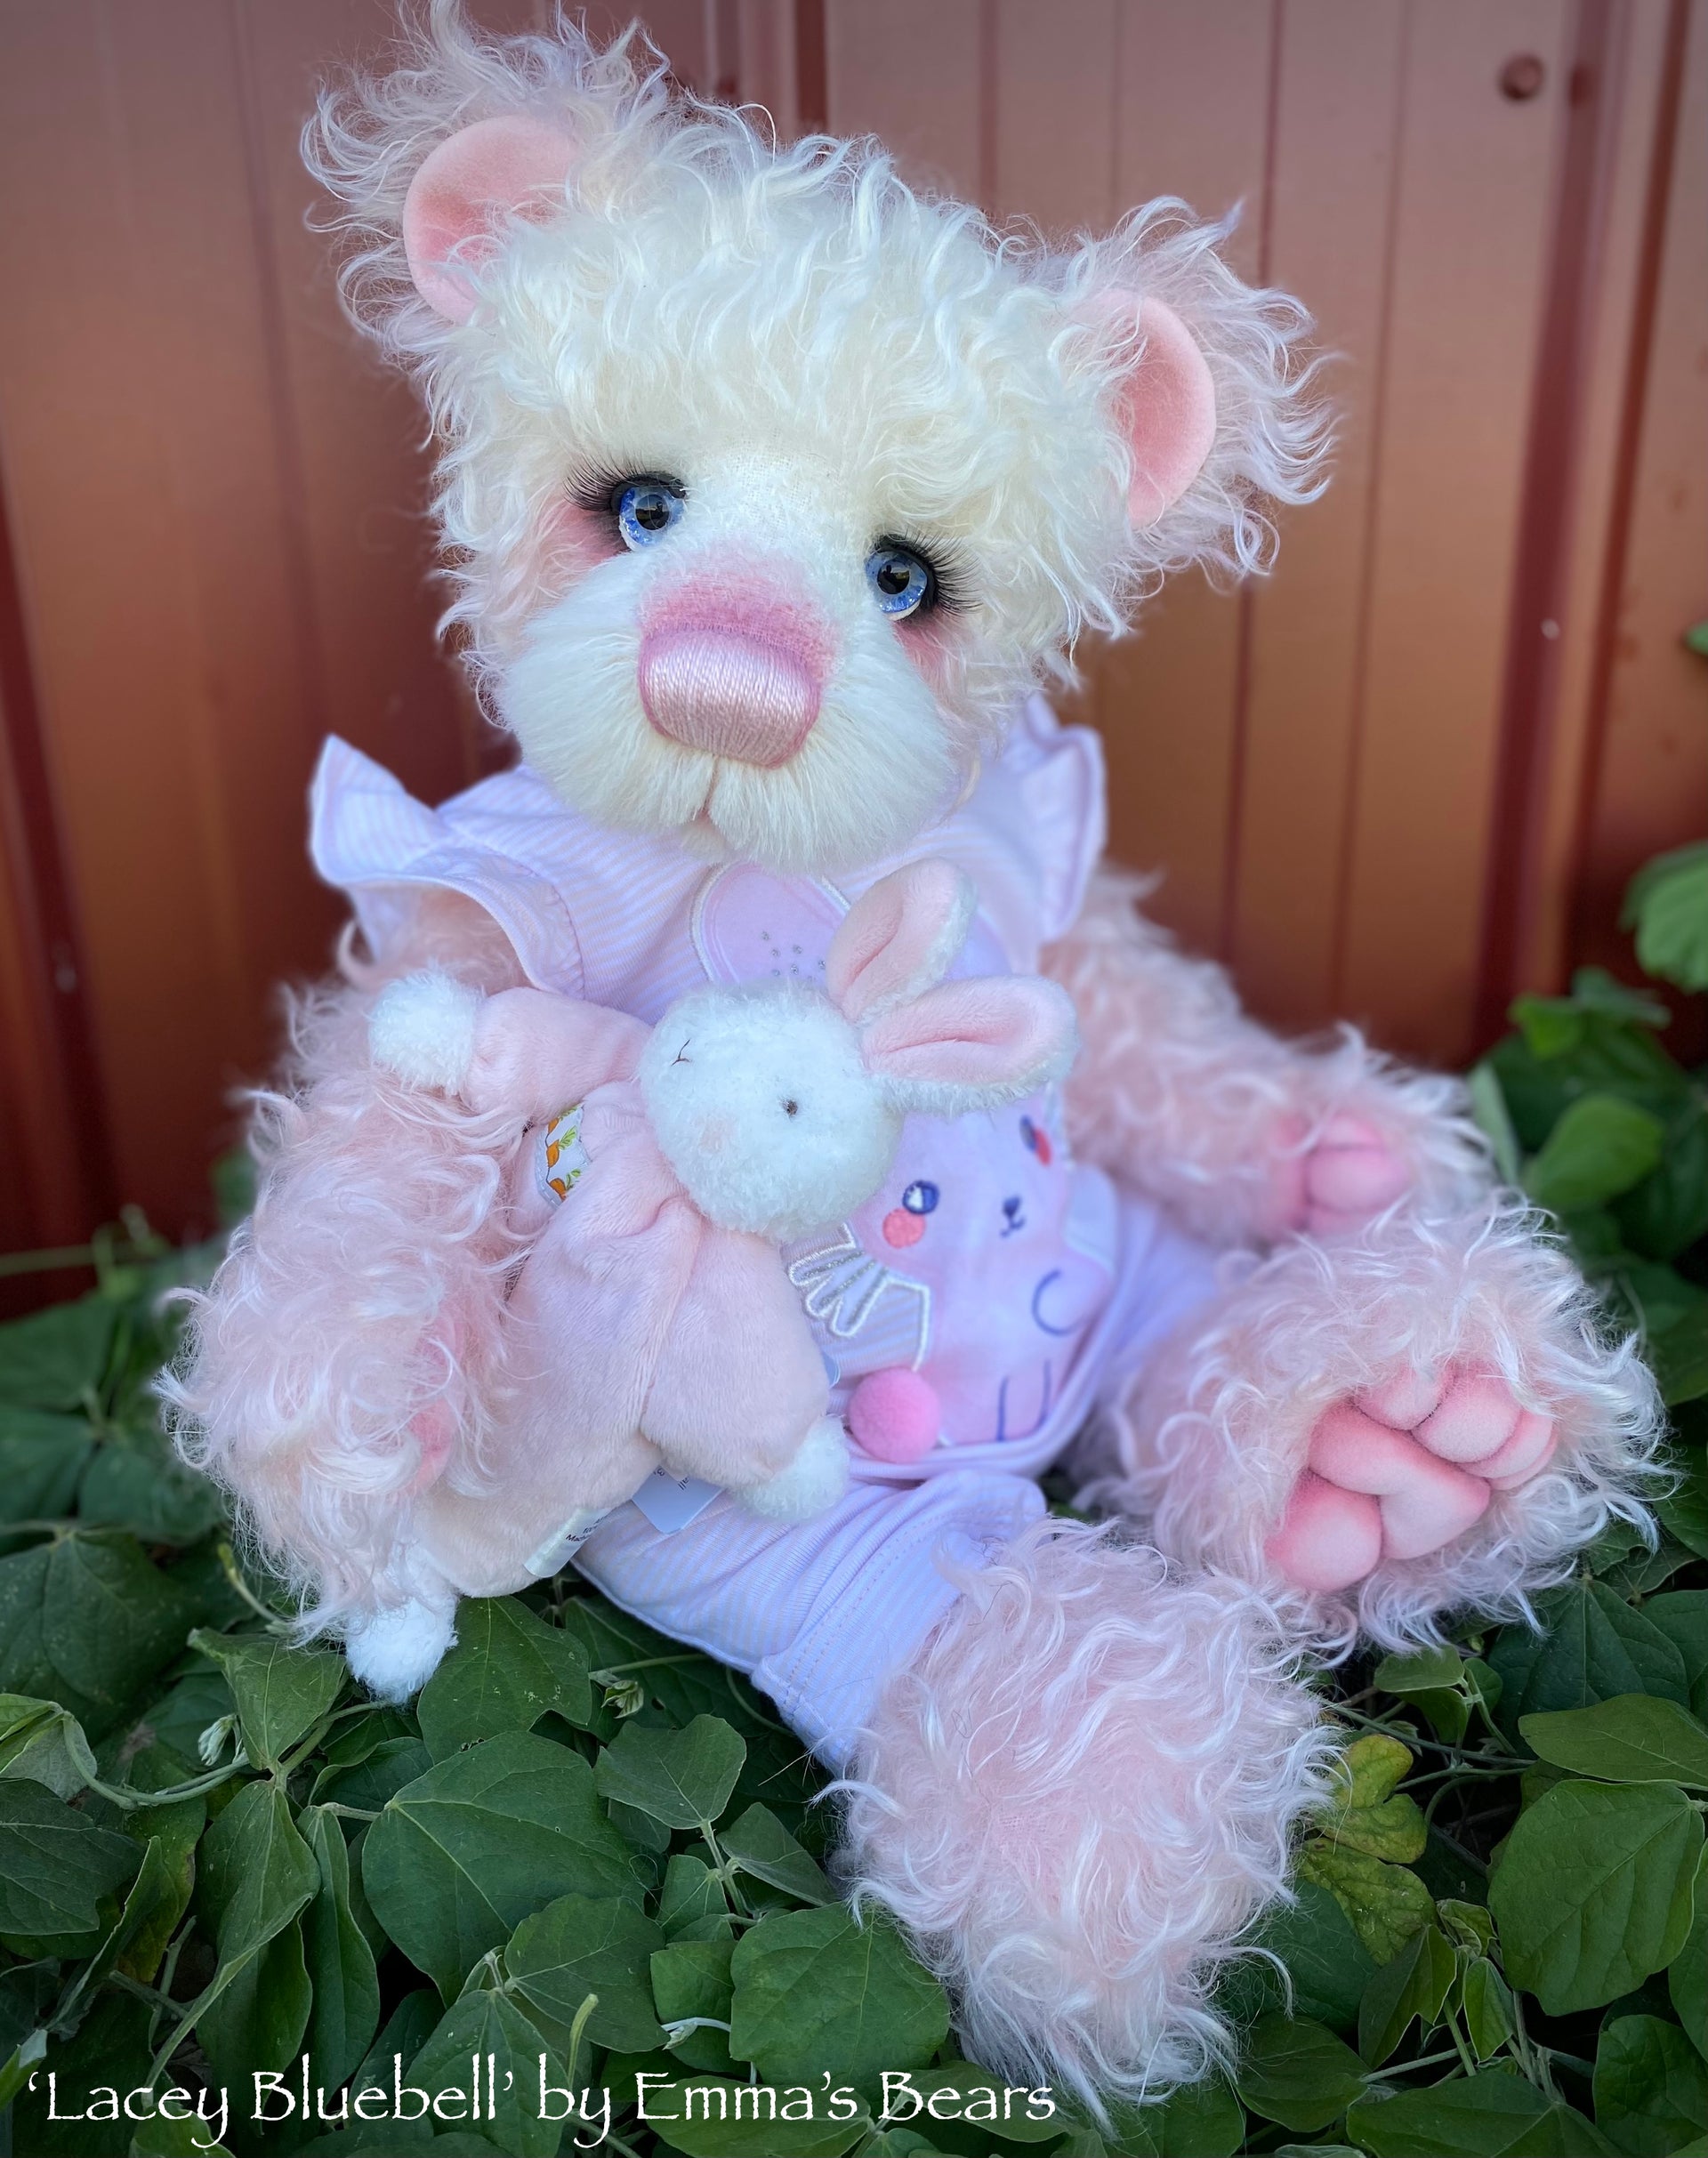 Lacey Bluebell - 17" Hand-Dyed Mohair Artist Baby Bear by Emma's Bears - OOAK